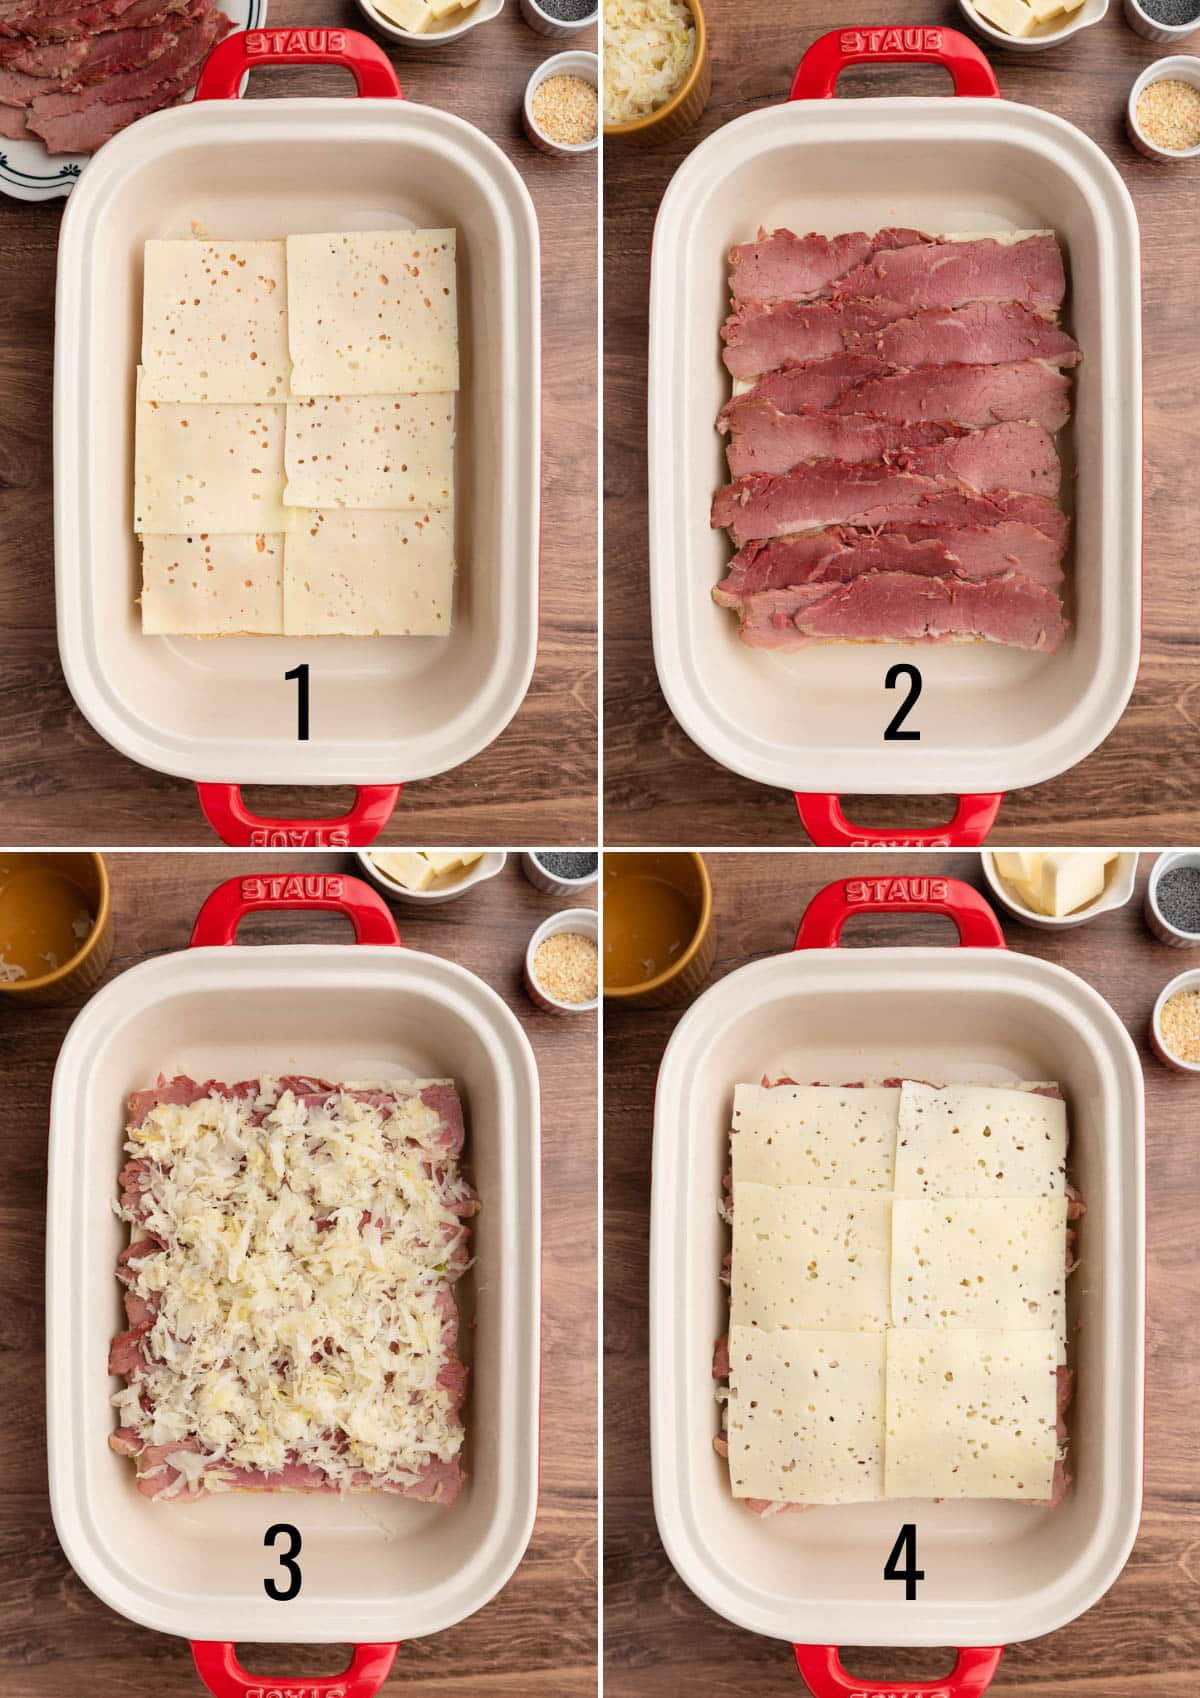 collage of 4 photos showing the process of layering Reuben sliders with Swiss cheese, corned beef, and sauerkraut in a ceramic baking dish